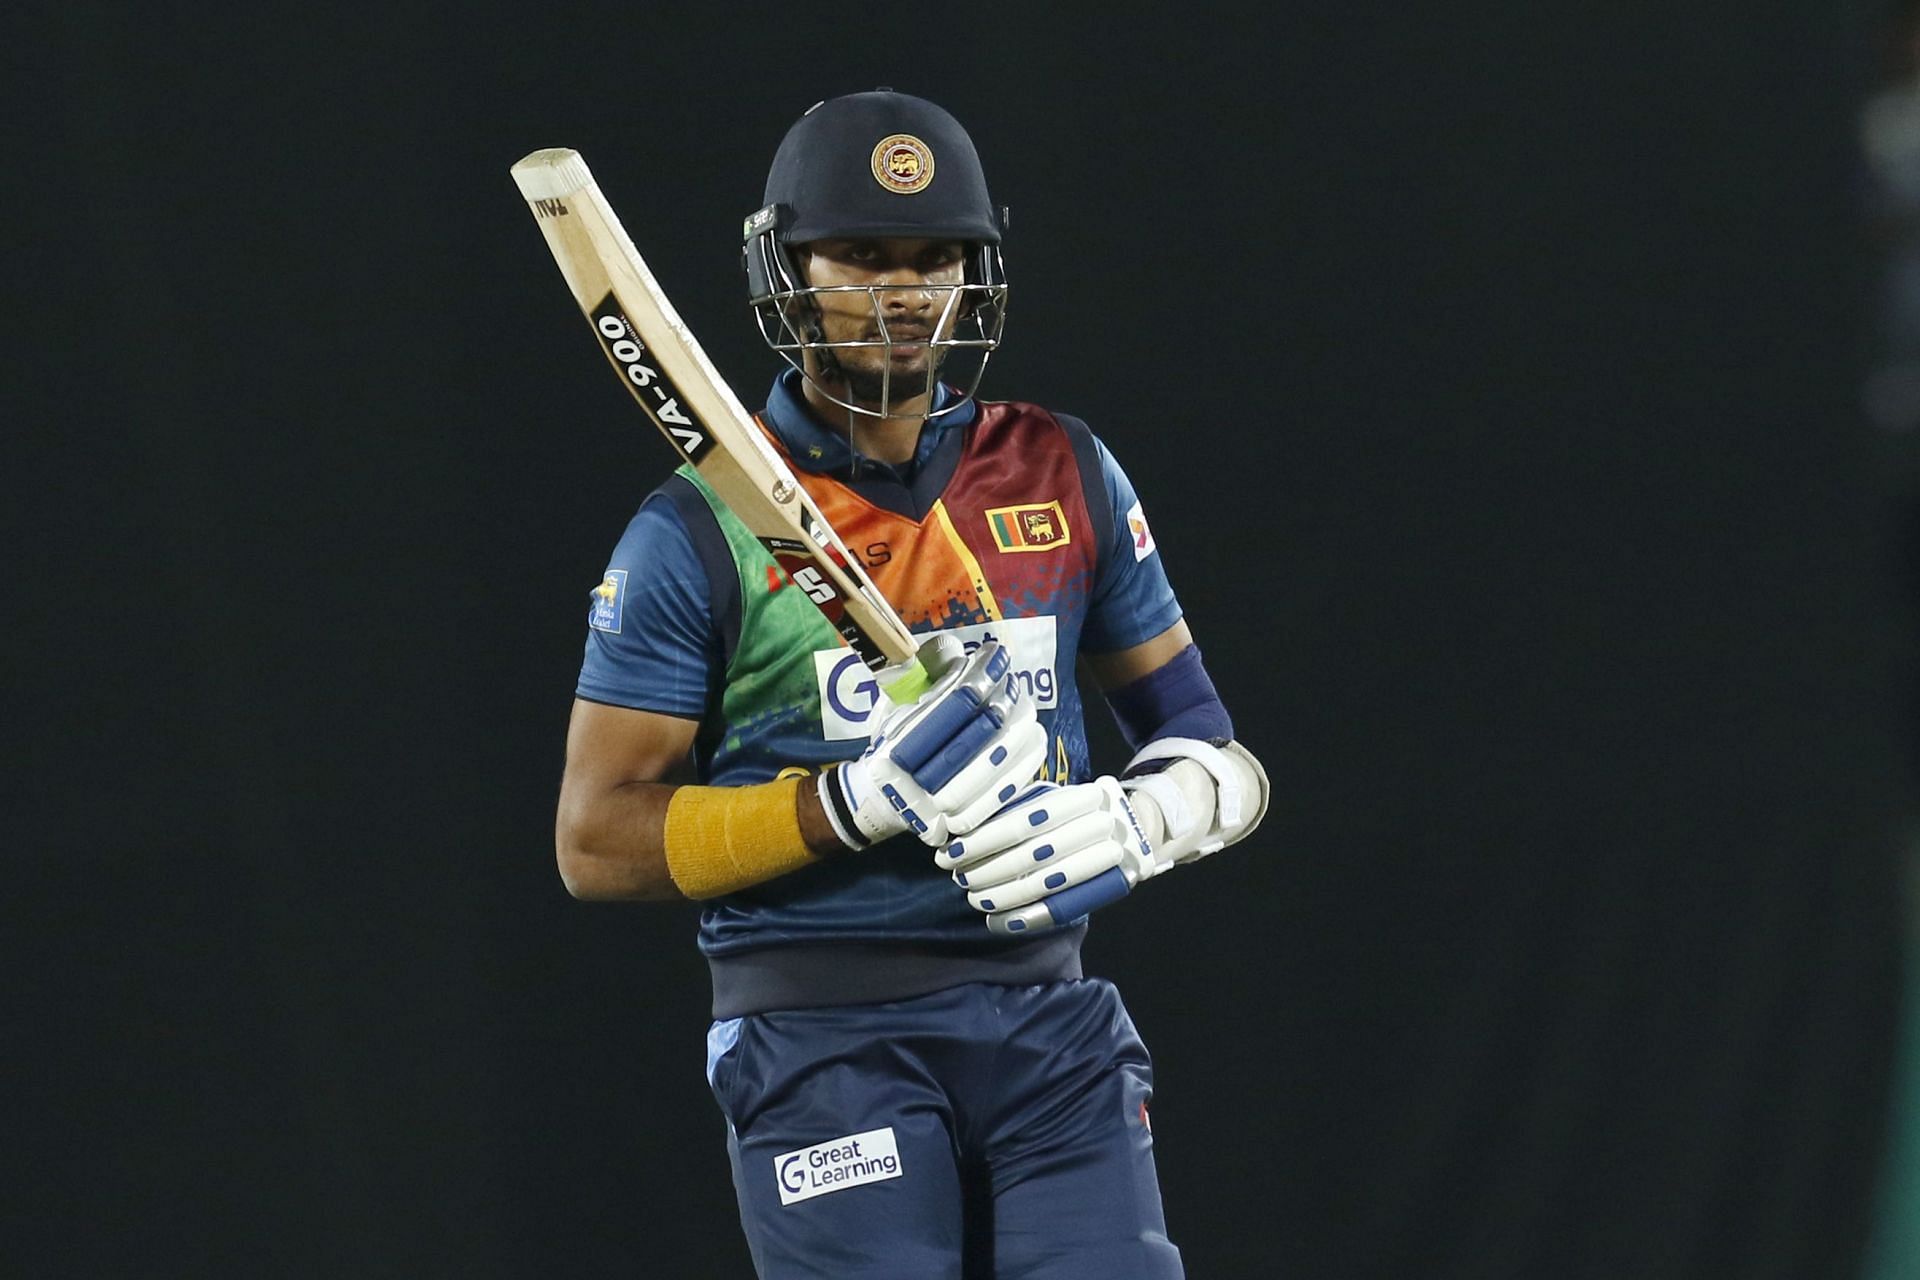 Dasun Shanaka was one of the few positives for the visitors in this India vs Sri Lanka T20I series